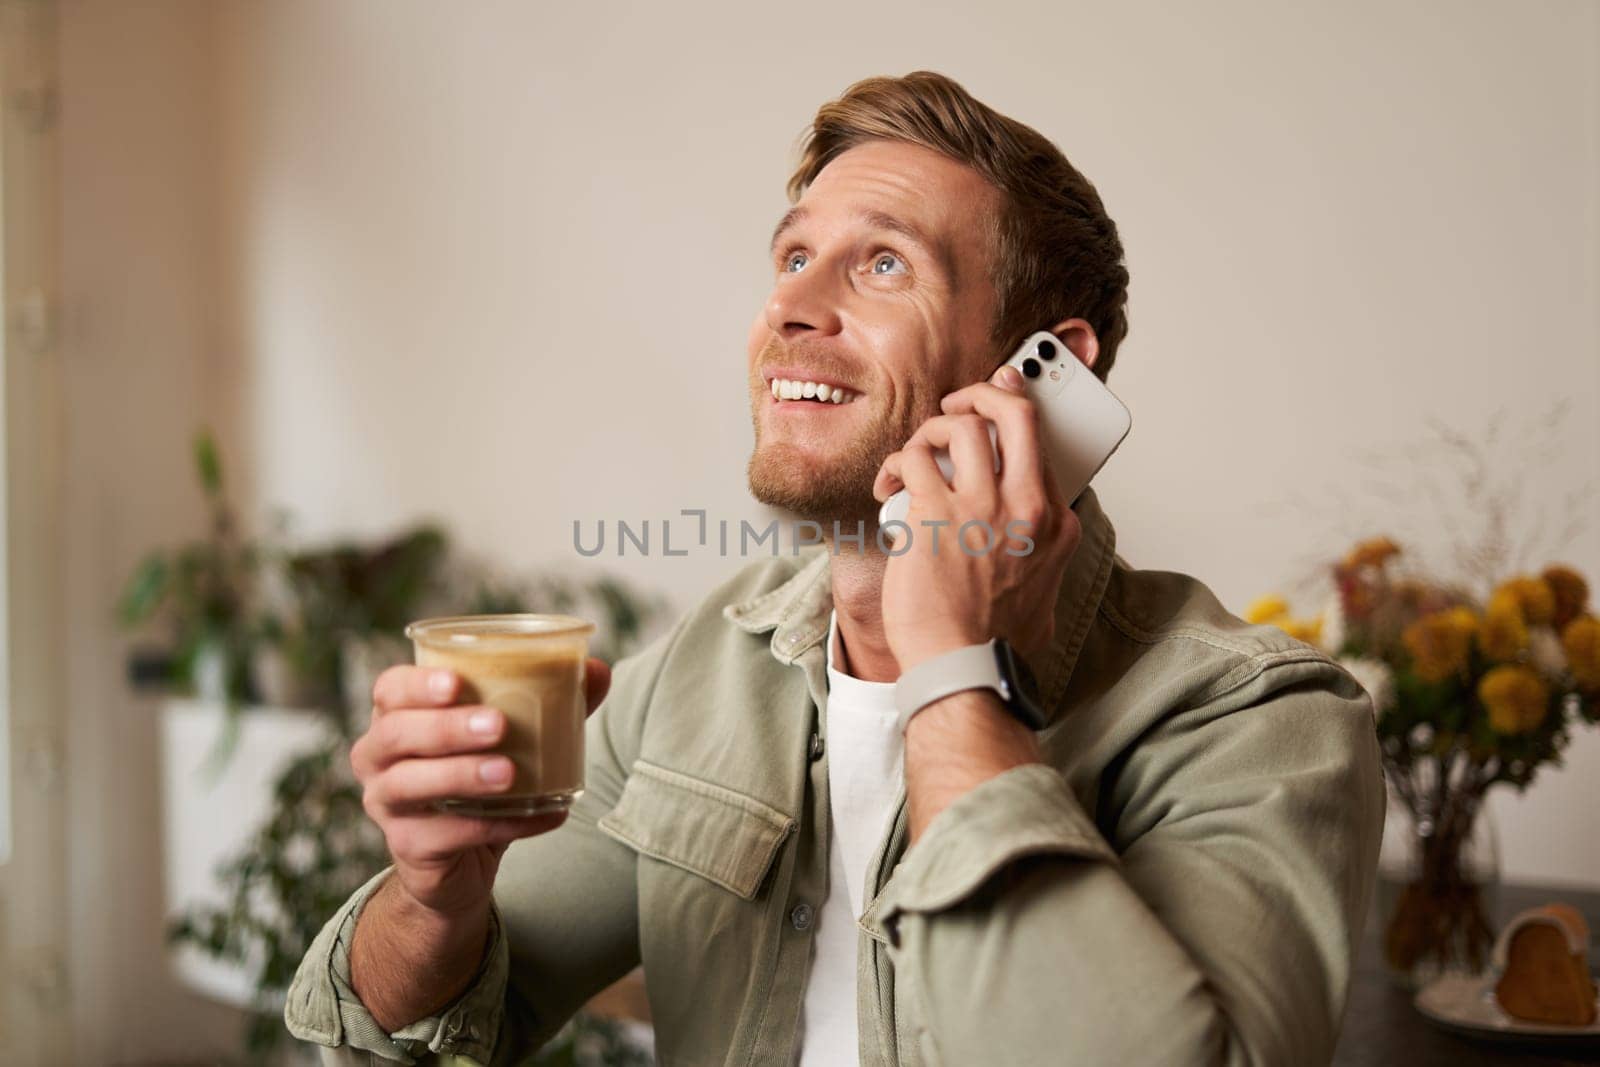 Portrait of handsome young man talking on the phone, sitting in cafe and drinking coffee, answering a call.